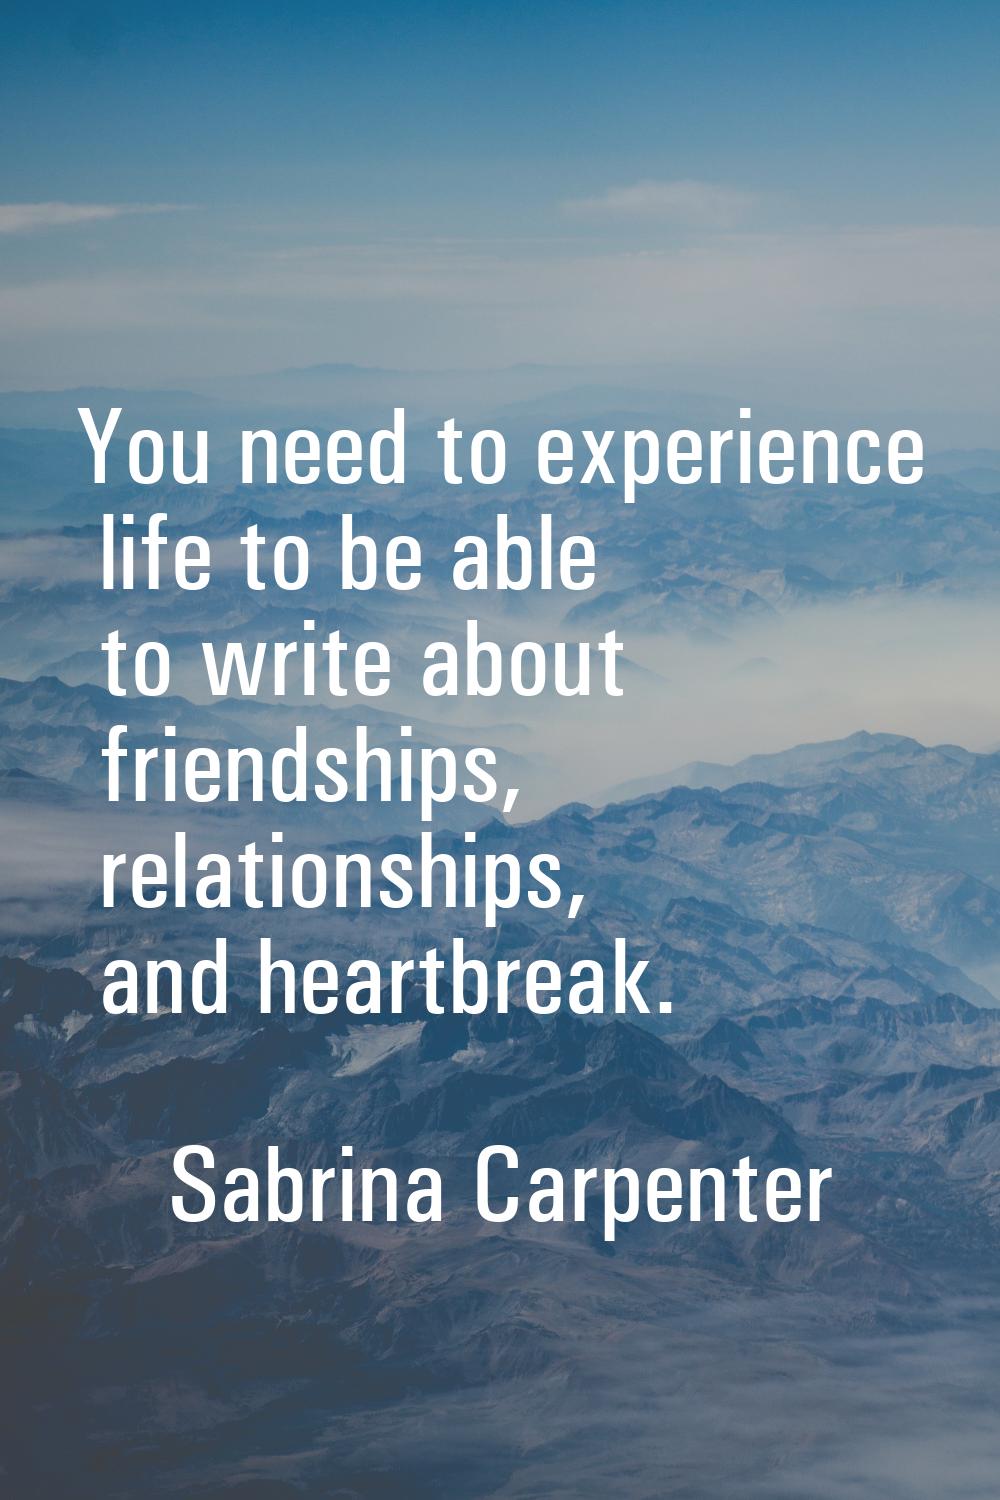 You need to experience life to be able to write about friendships, relationships, and heartbreak.